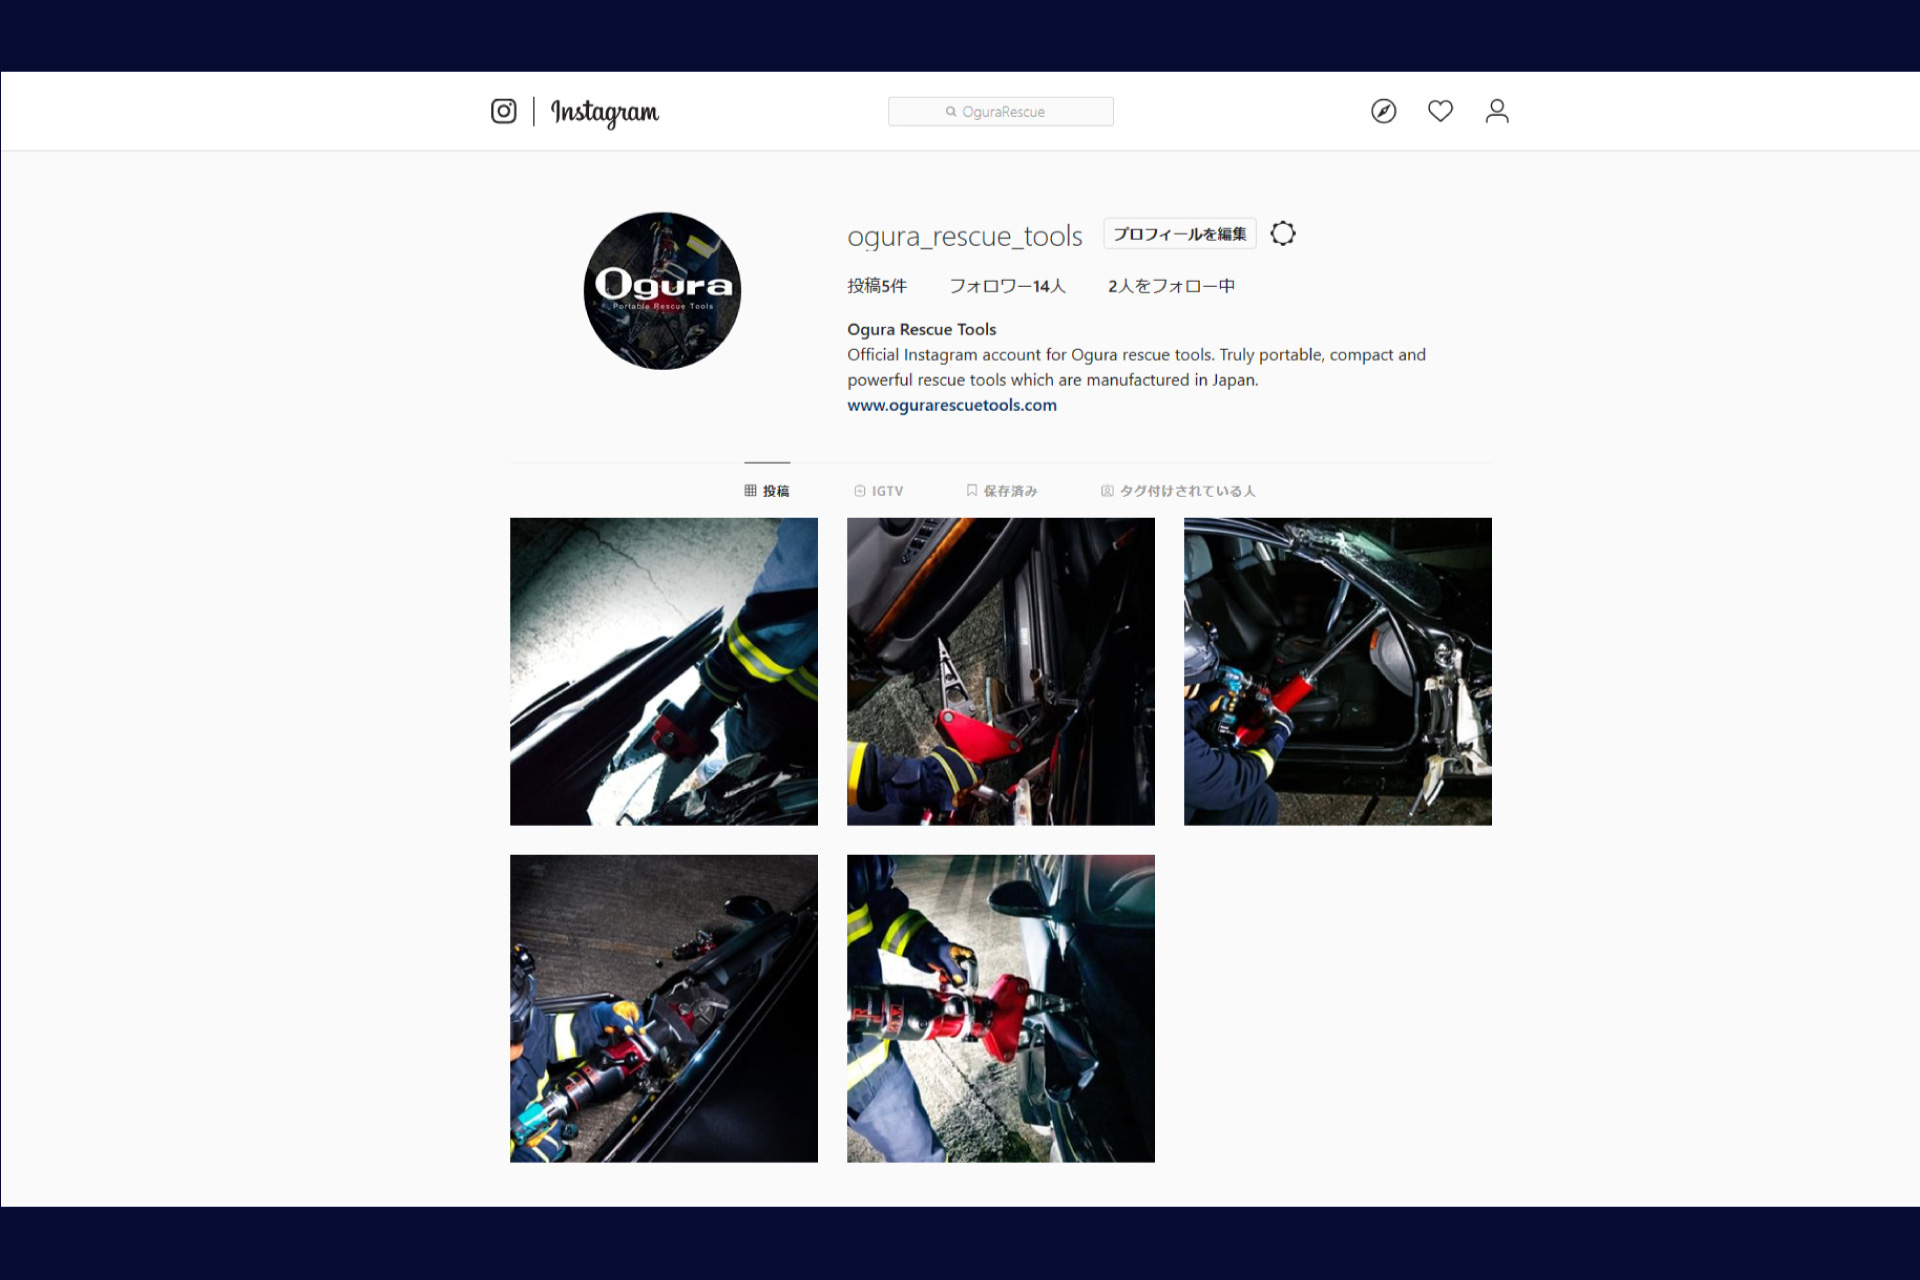 Launched the Ogura Rescue Tools Instagram Account